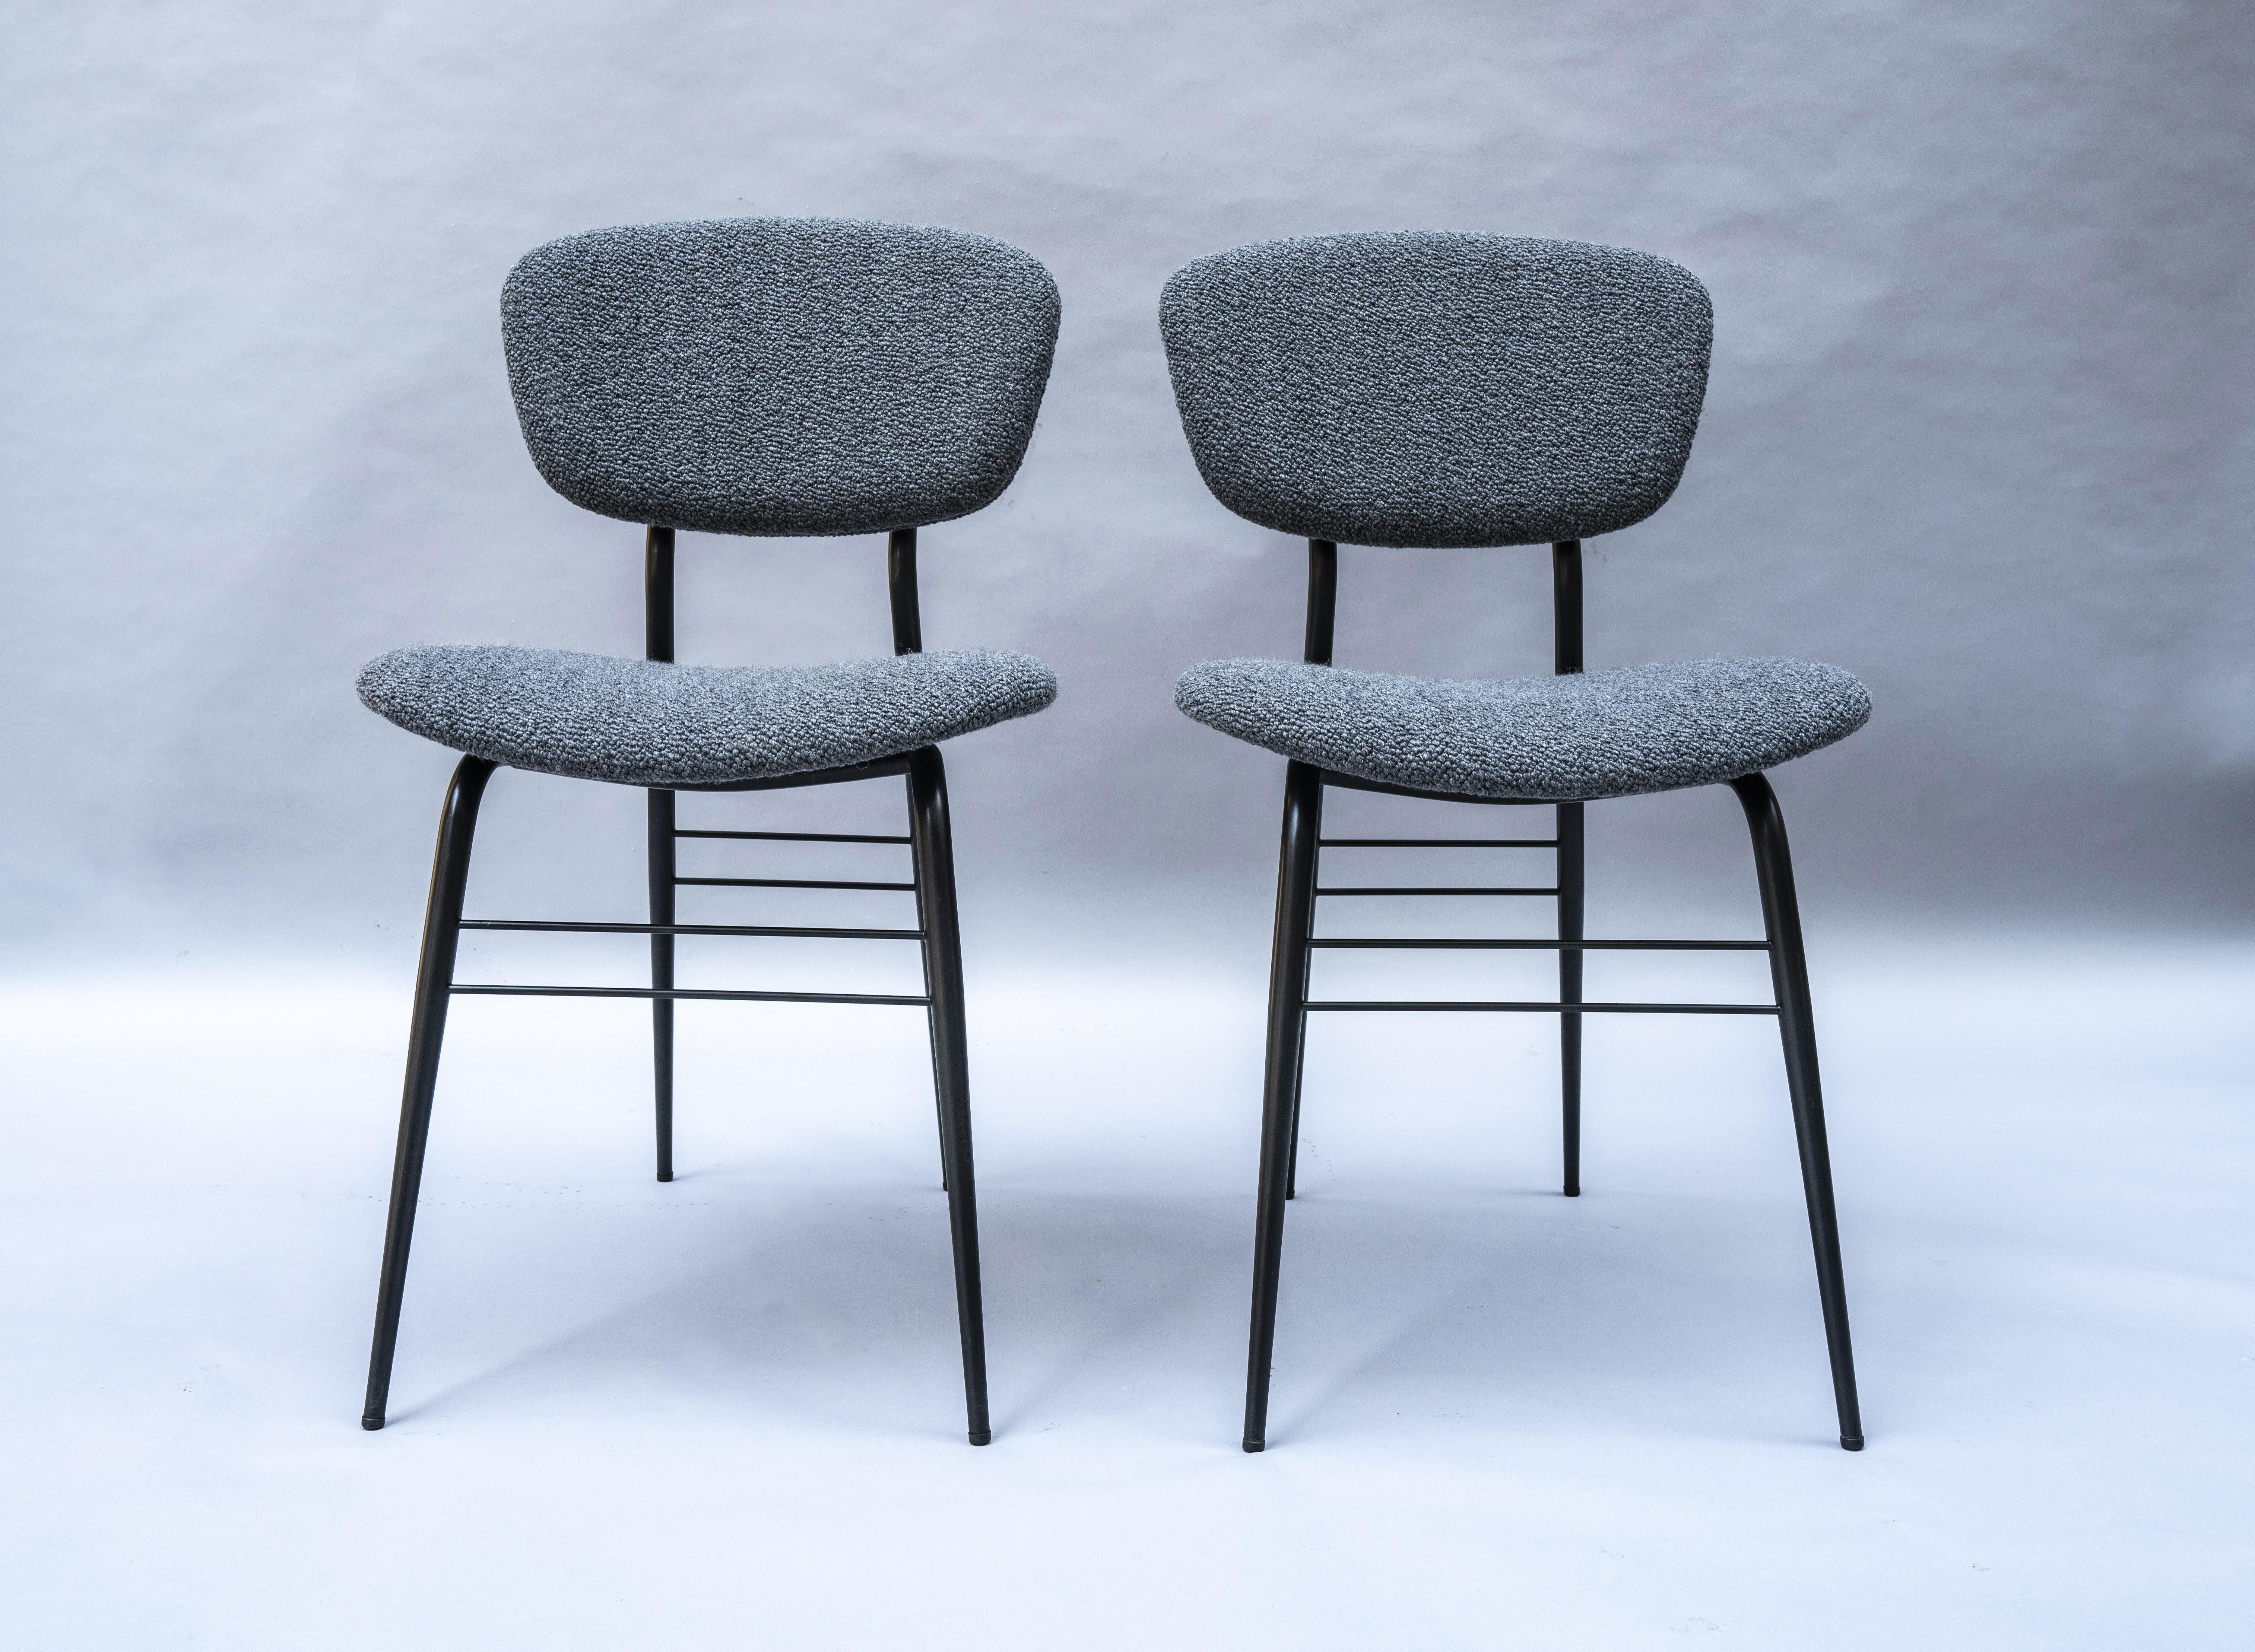 Set of six dining chairs by Gastone Rinaldi, Italy 1950s, completely restored, black painted steel structure, brass details, newly reupholstered
in grey boucle' by Larsen.